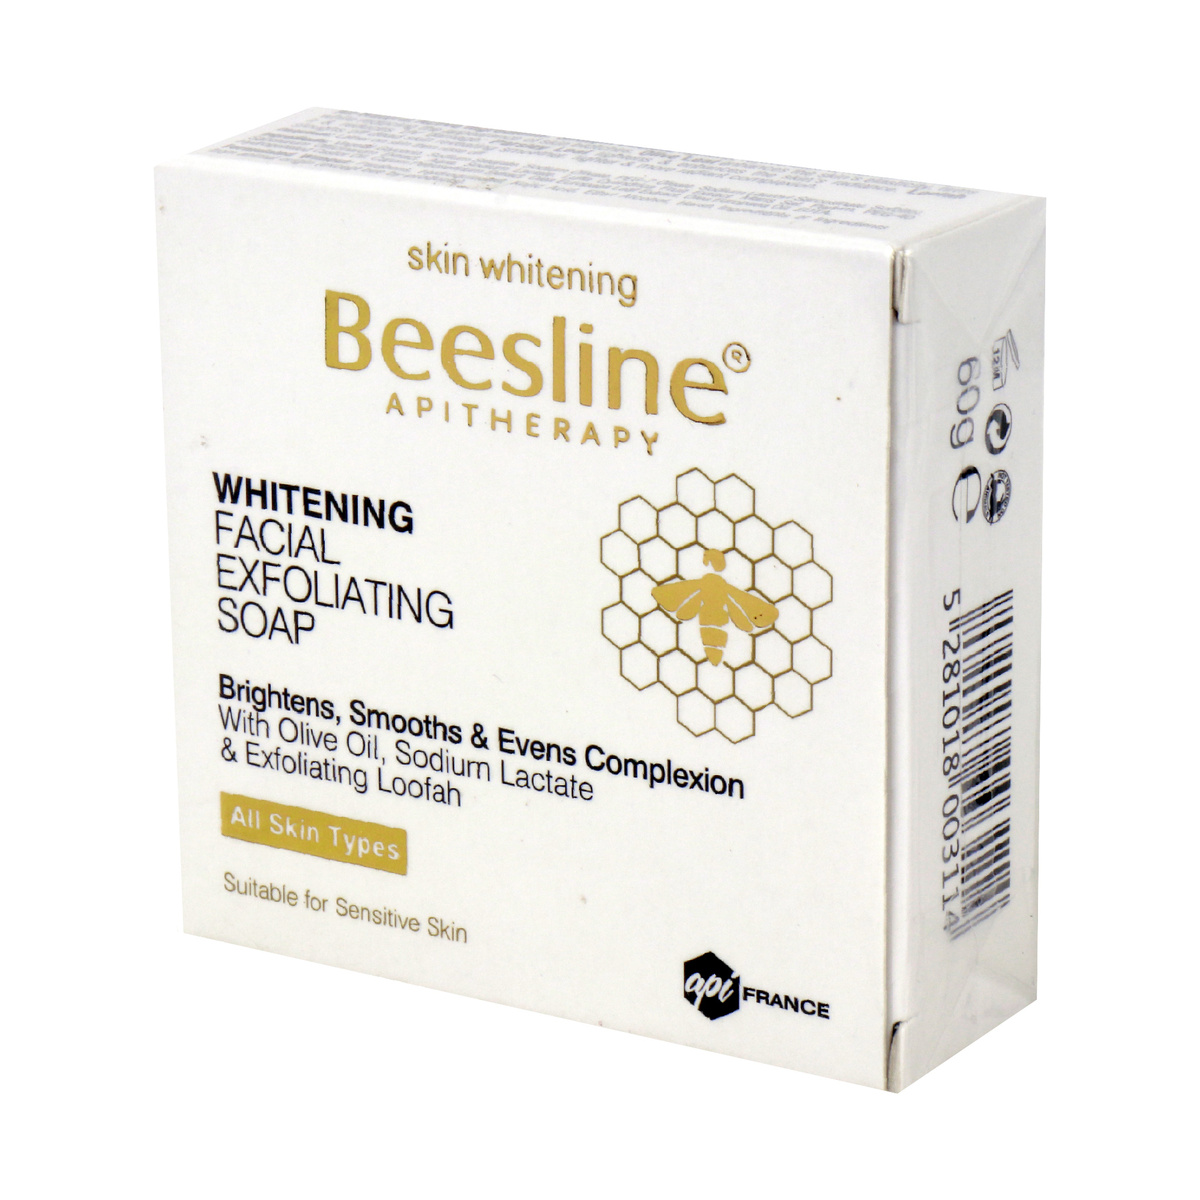 Beesline Facial Exfoliating Soap Whitening 60g